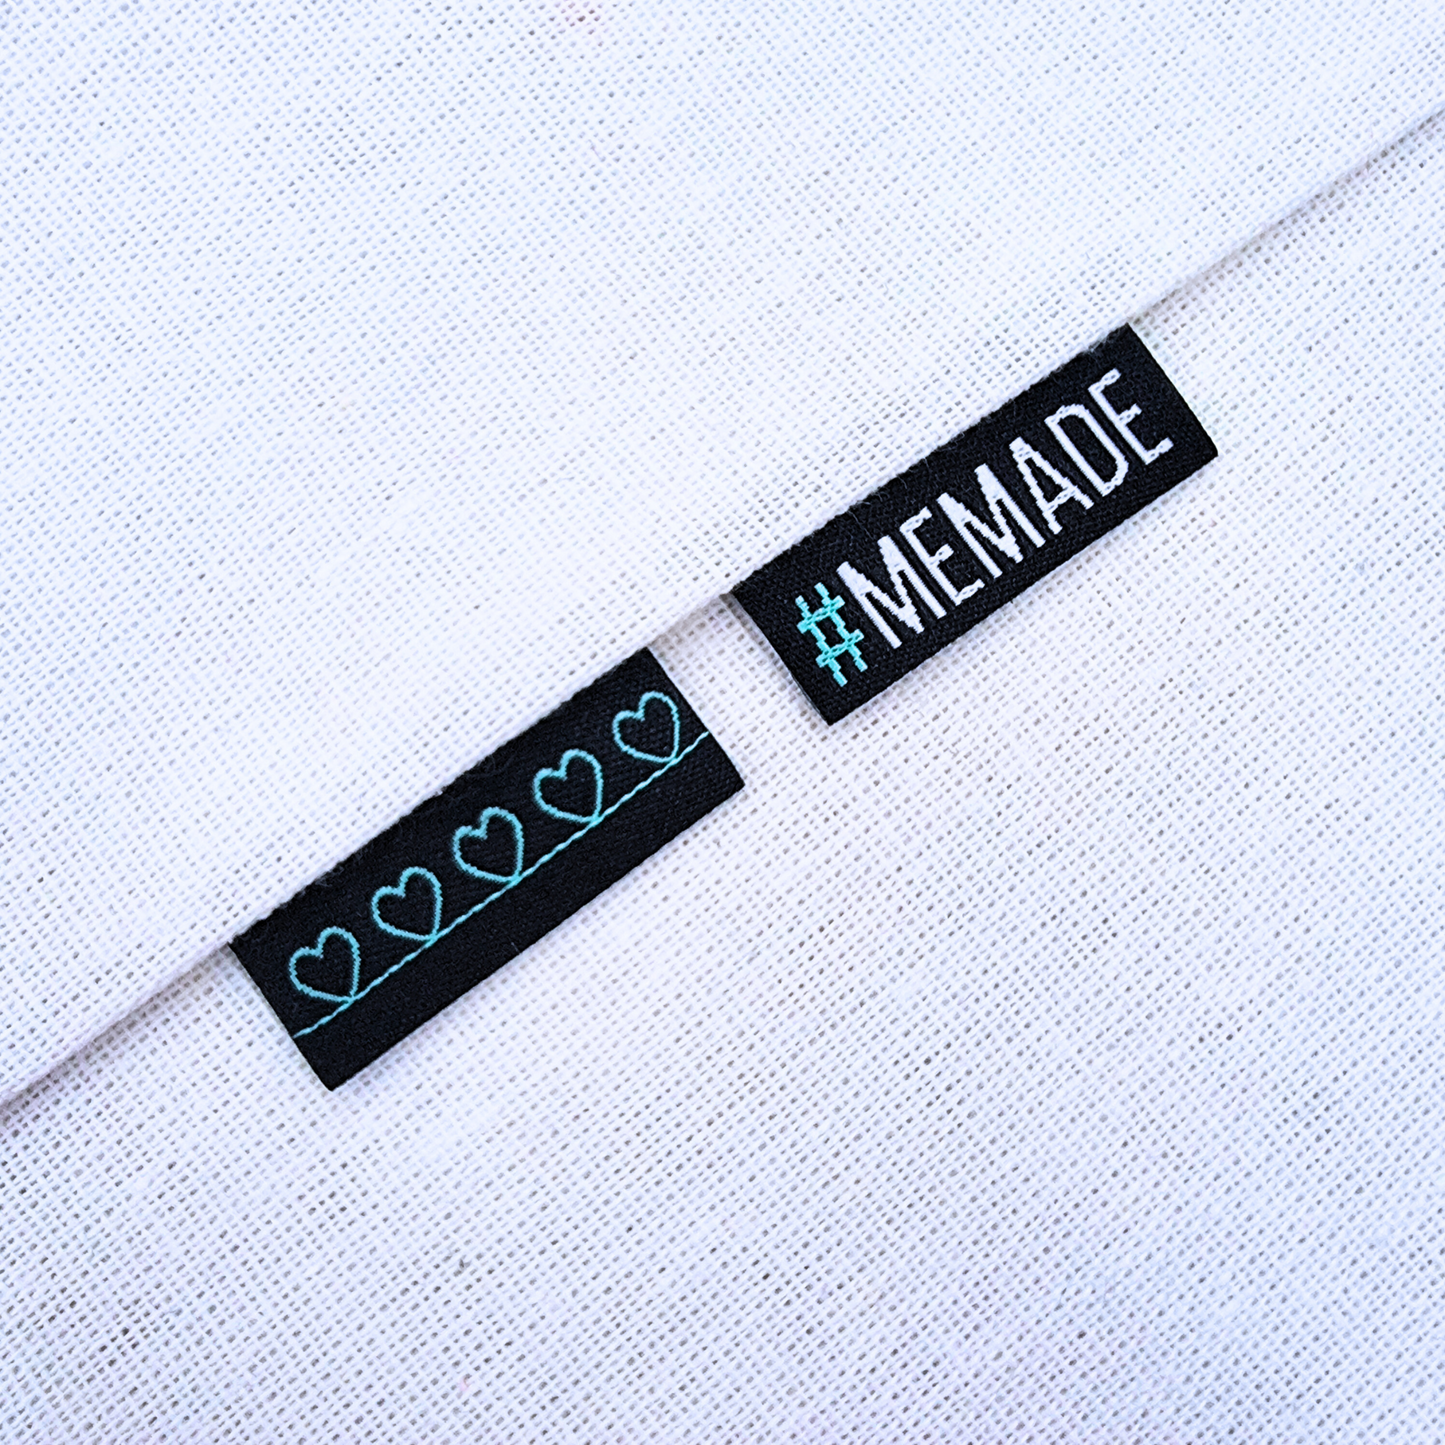 #MEMADE | Woven Sew In Labels